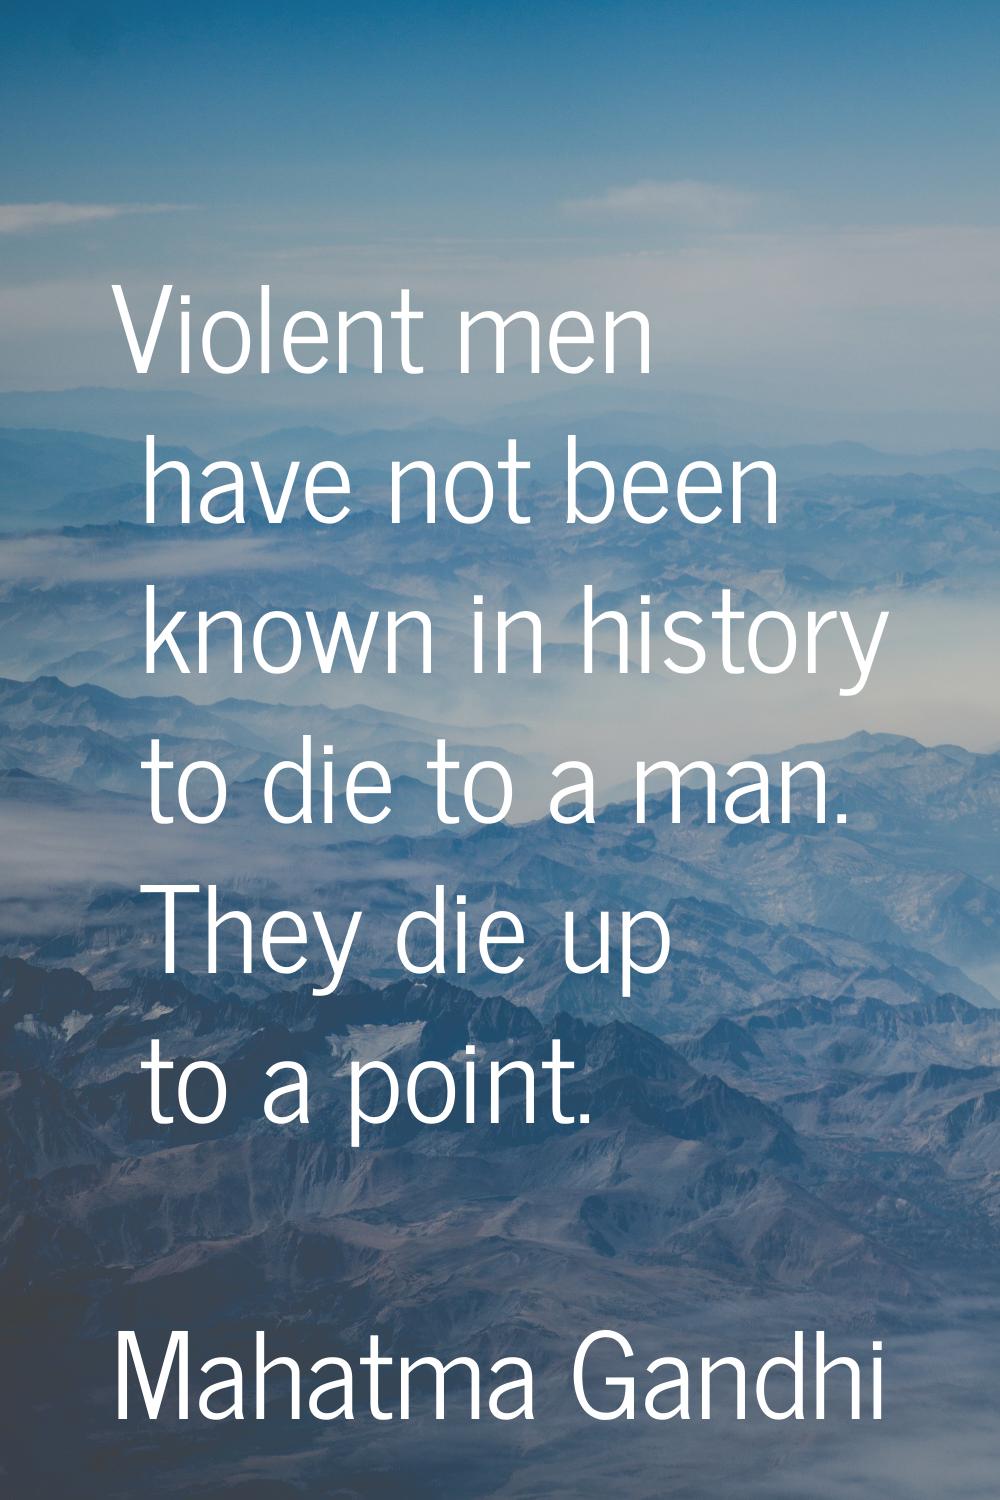 Violent men have not been known in history to die to a man. They die up to a point.